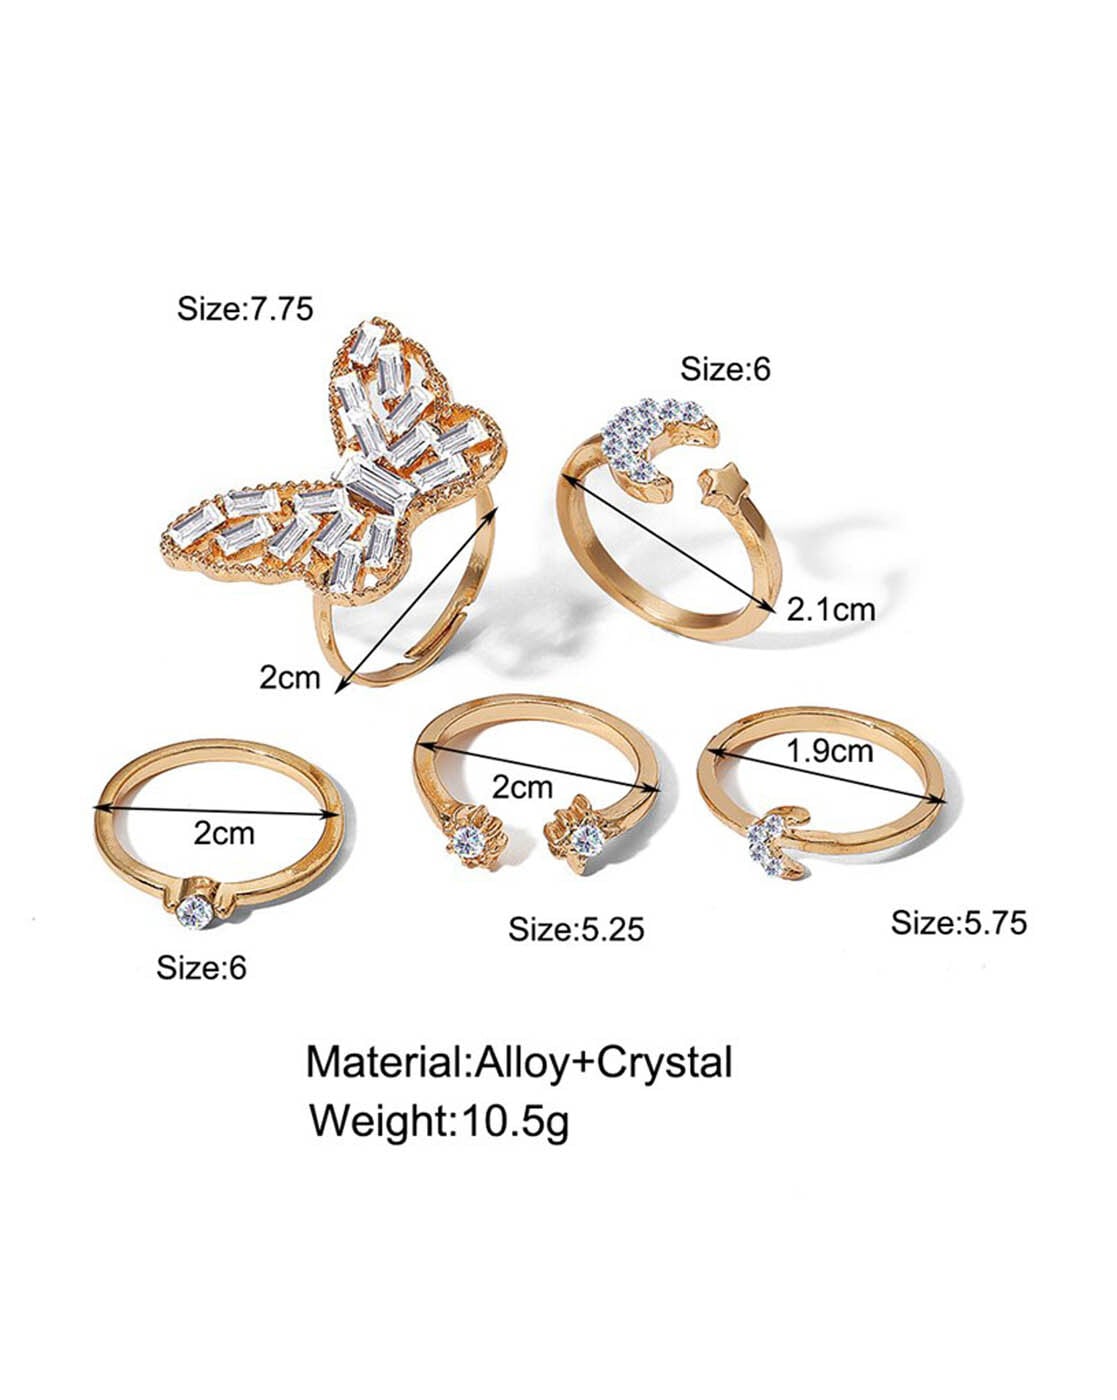 SilverWithGoldJewelry Product ID:1559629499 #goldjewelleryunique | Dubai  gold jewelry, Gold ring designs, Antique gold rings